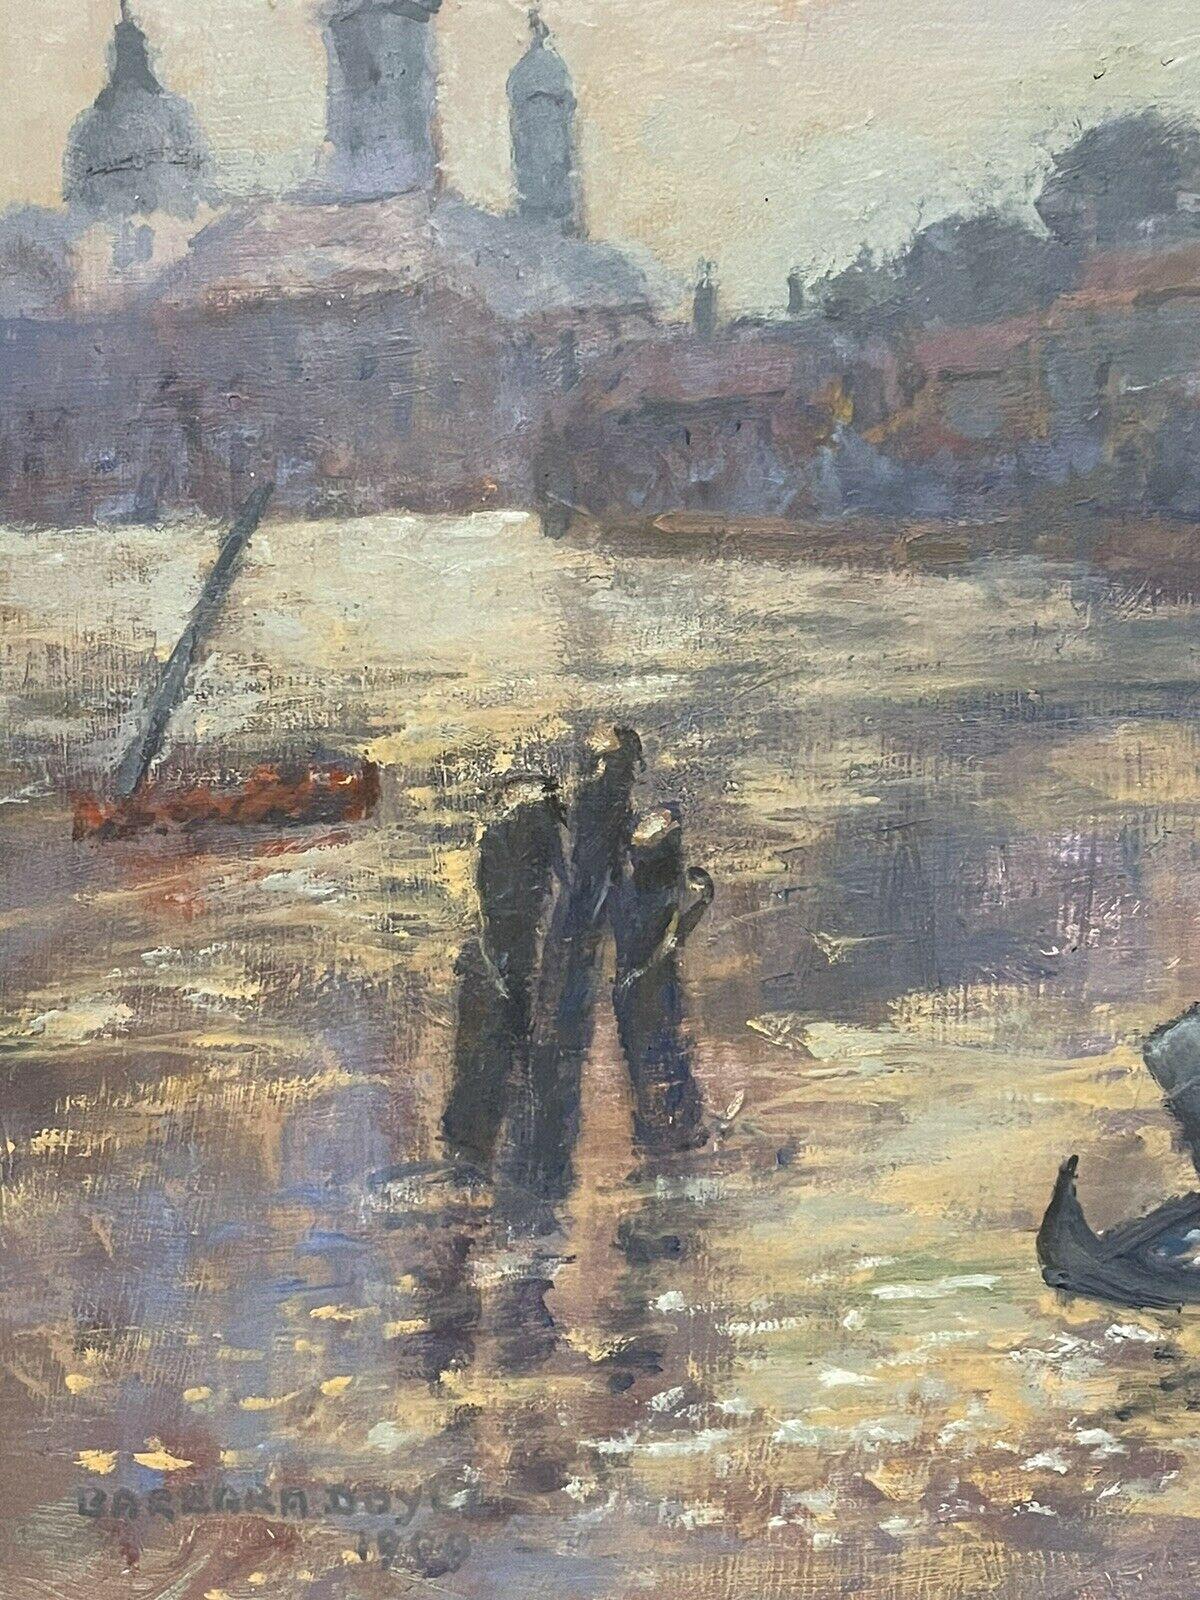 1970's MODERN BRITISH ENGLISH IMPRESSIONIST OIL PAINTING - GRAND CANAL VENICE - Gray Landscape Painting by Barbera Doyle